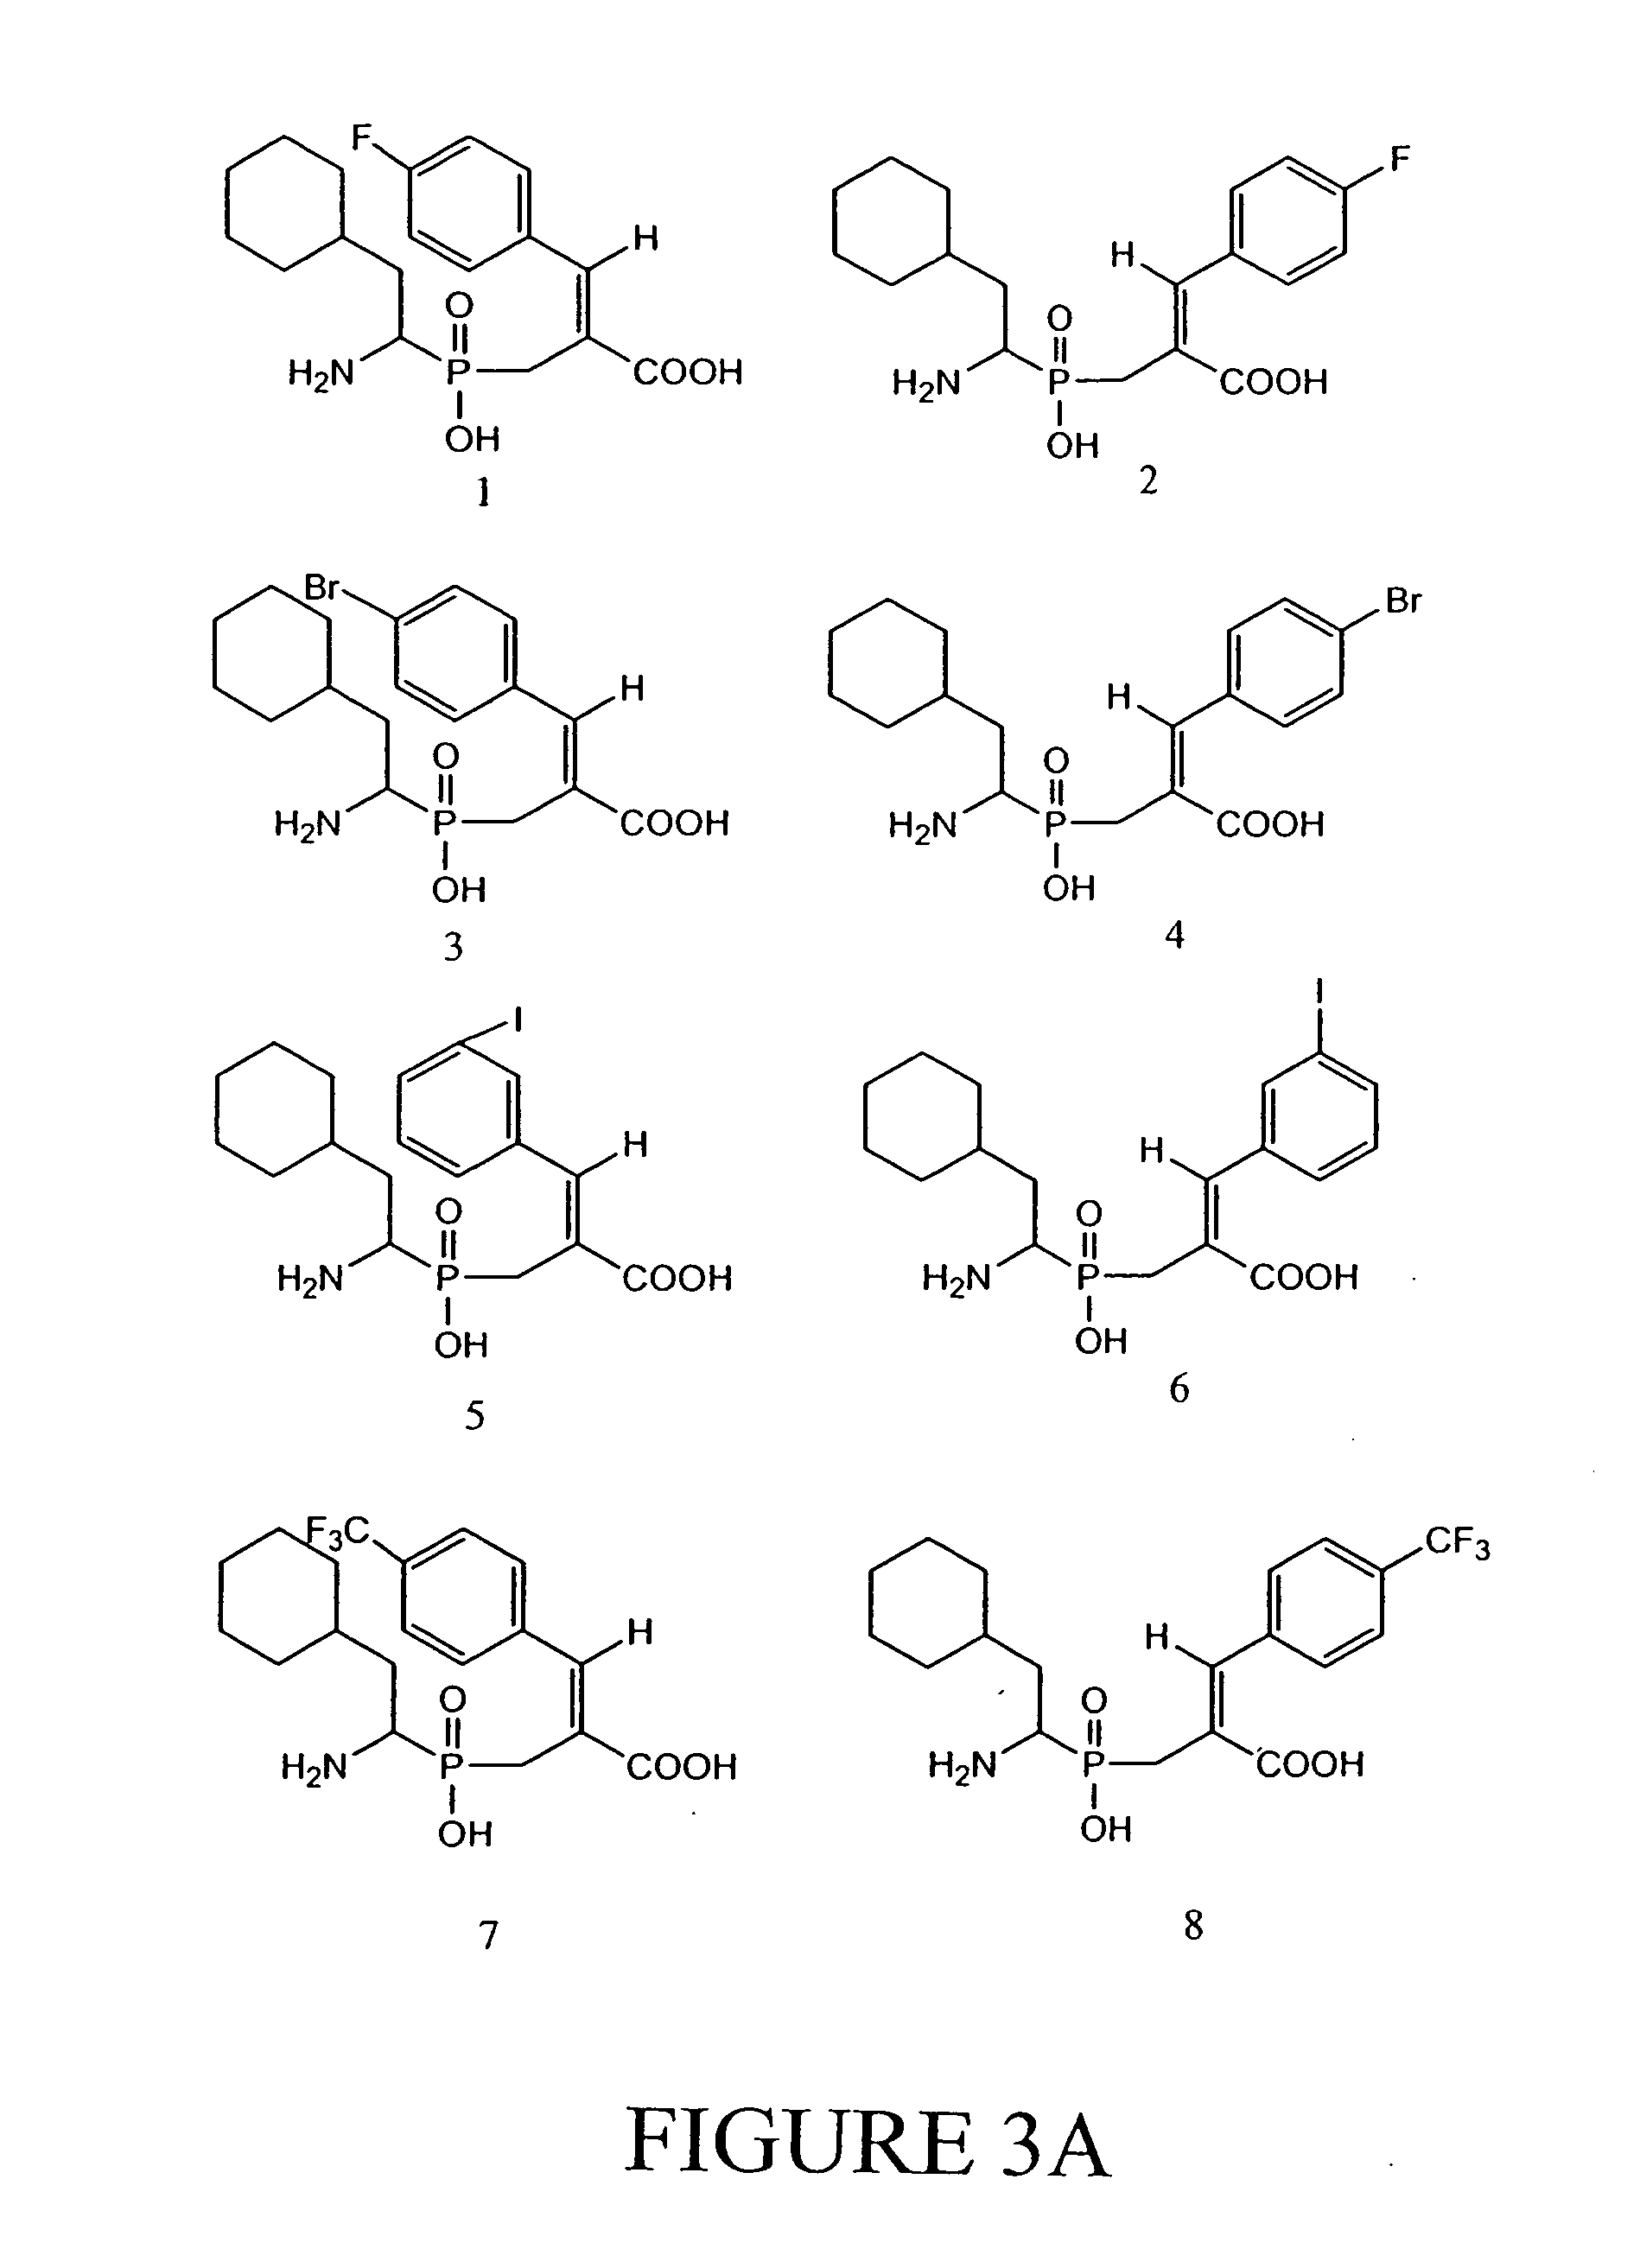 Design and synthesis of renal dipeptidase inhibitors